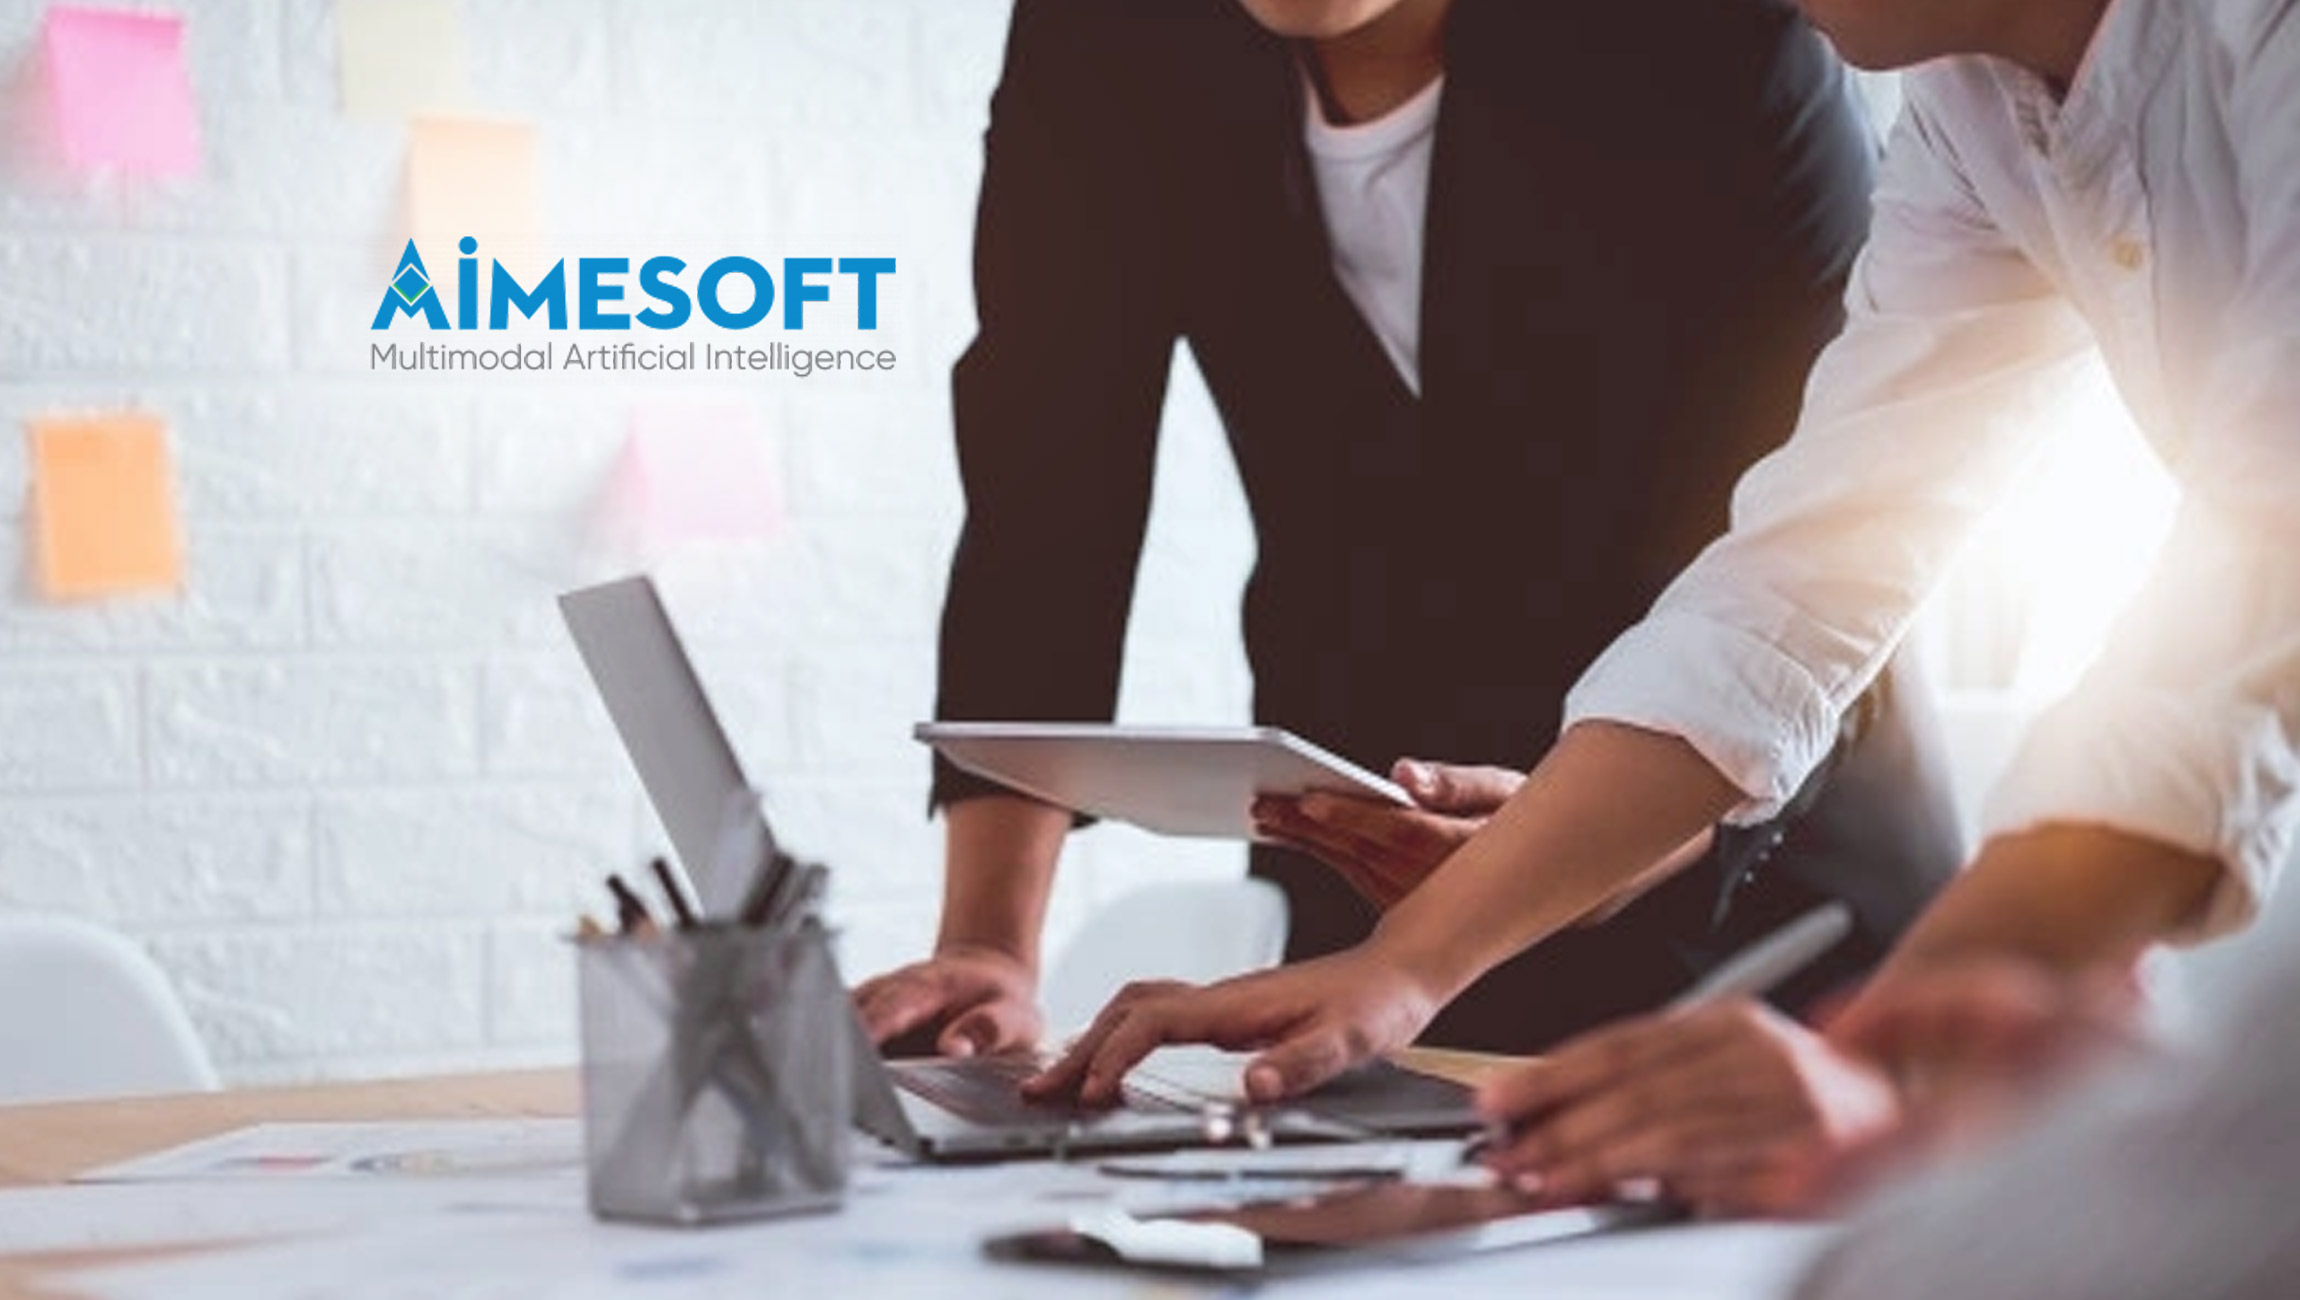 Technologies from Aimesoft are employed in hotel customer management